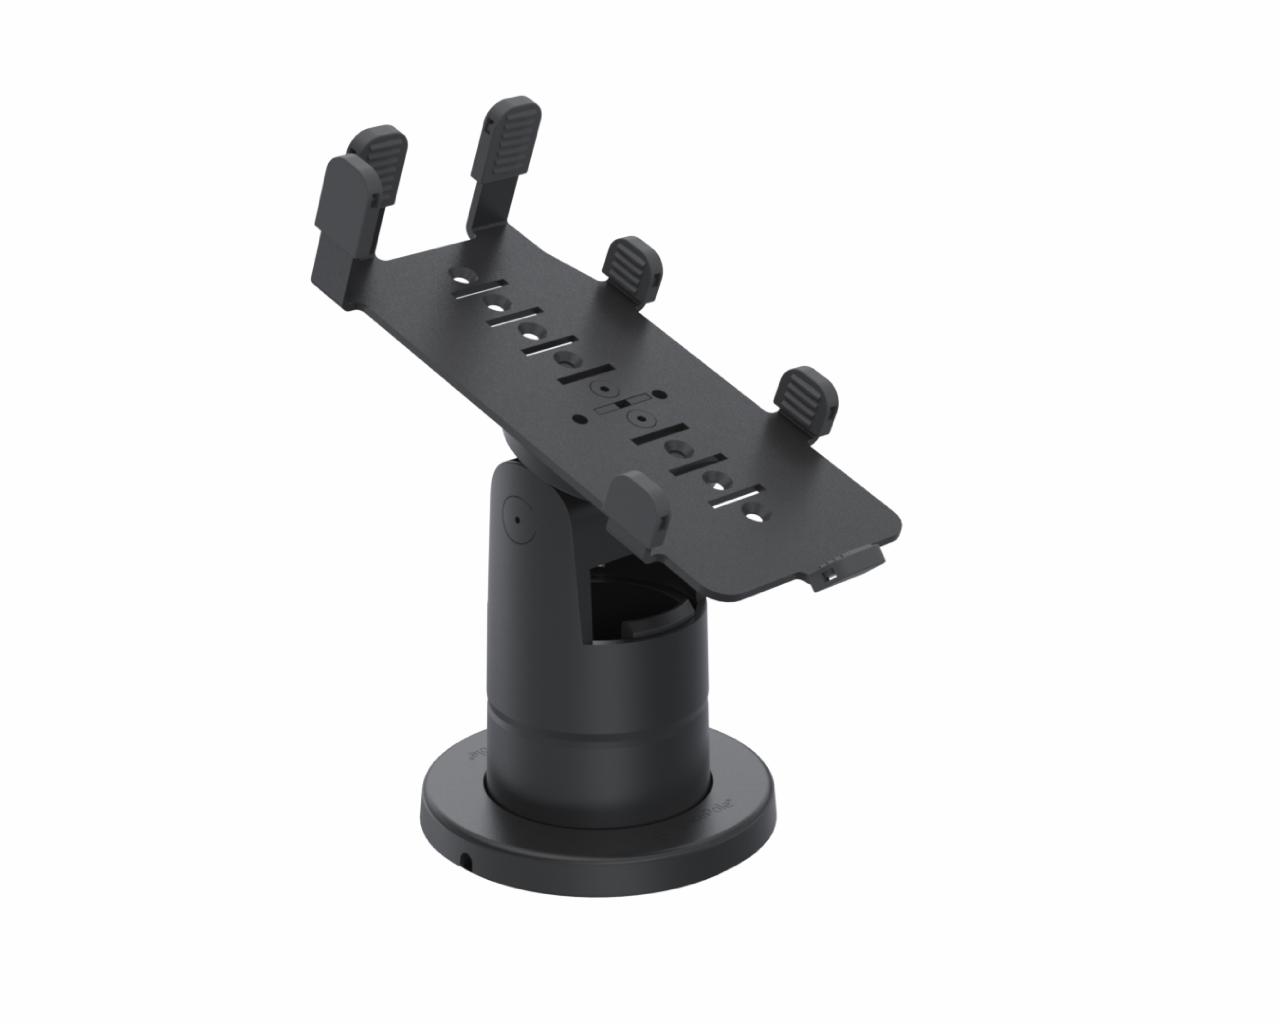 SpacePole Stack® with MultiGrip™ plate for Verifone P200 & P400 (no handle)